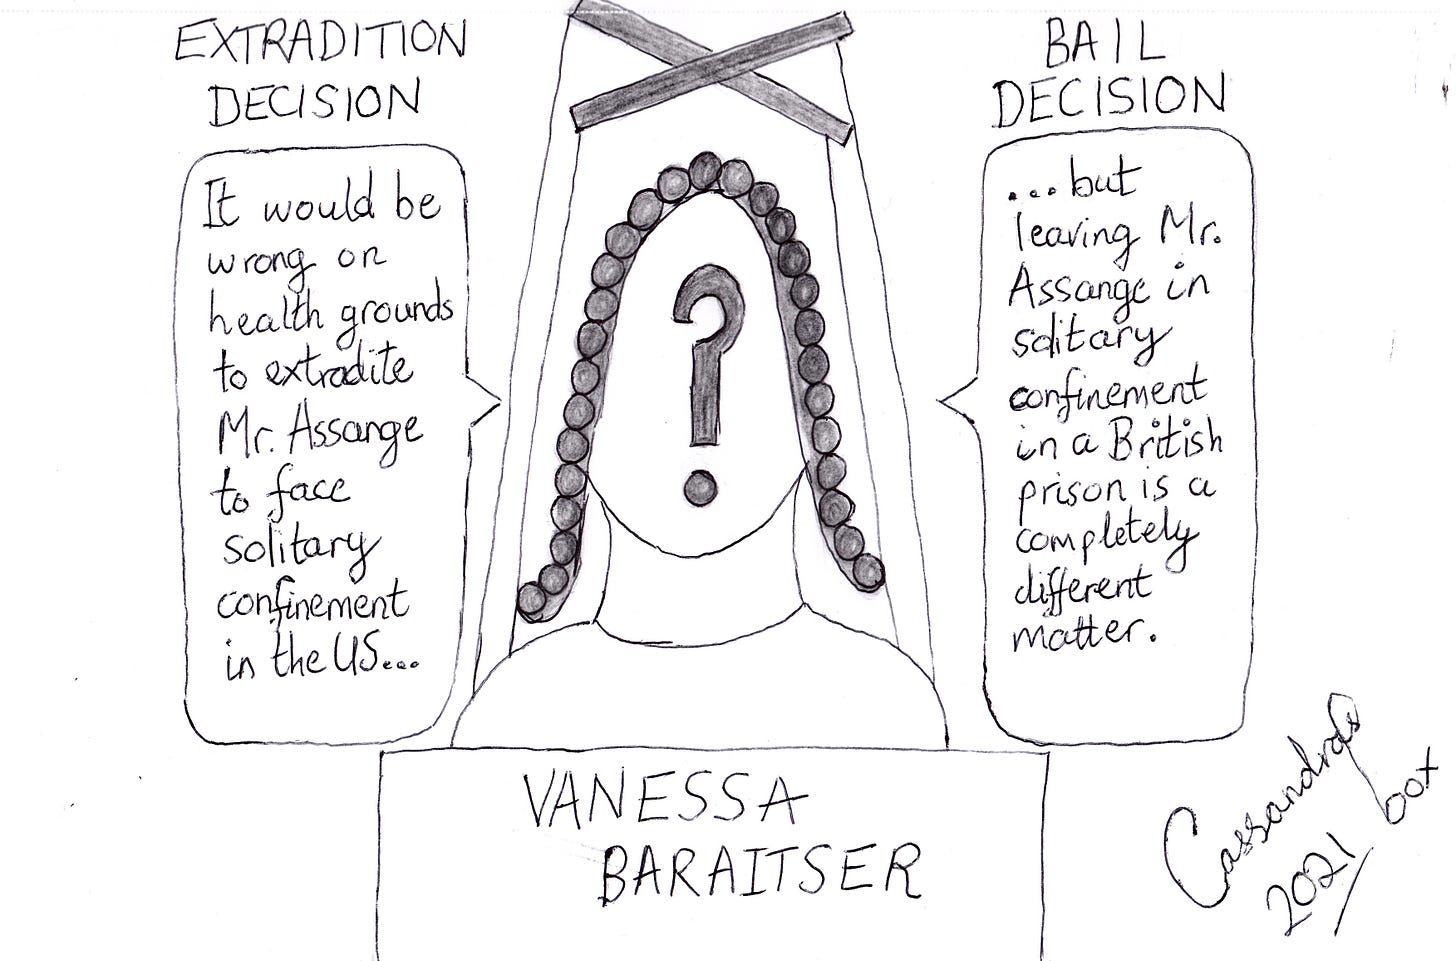 Cartoon of Judge with a question mark for a face. Text underneath reads 'Vanessa Baraitser'. Text on left reads: Extradition decision. Quote bubble: "It would be wrong on health grounds to extradite Mr. Assange to face solitary confinement in the US." Text on right: Bail decision. Quote bubble: "But leaving Mr. Assange in solitary confinement in a British prison is a completely different matter."